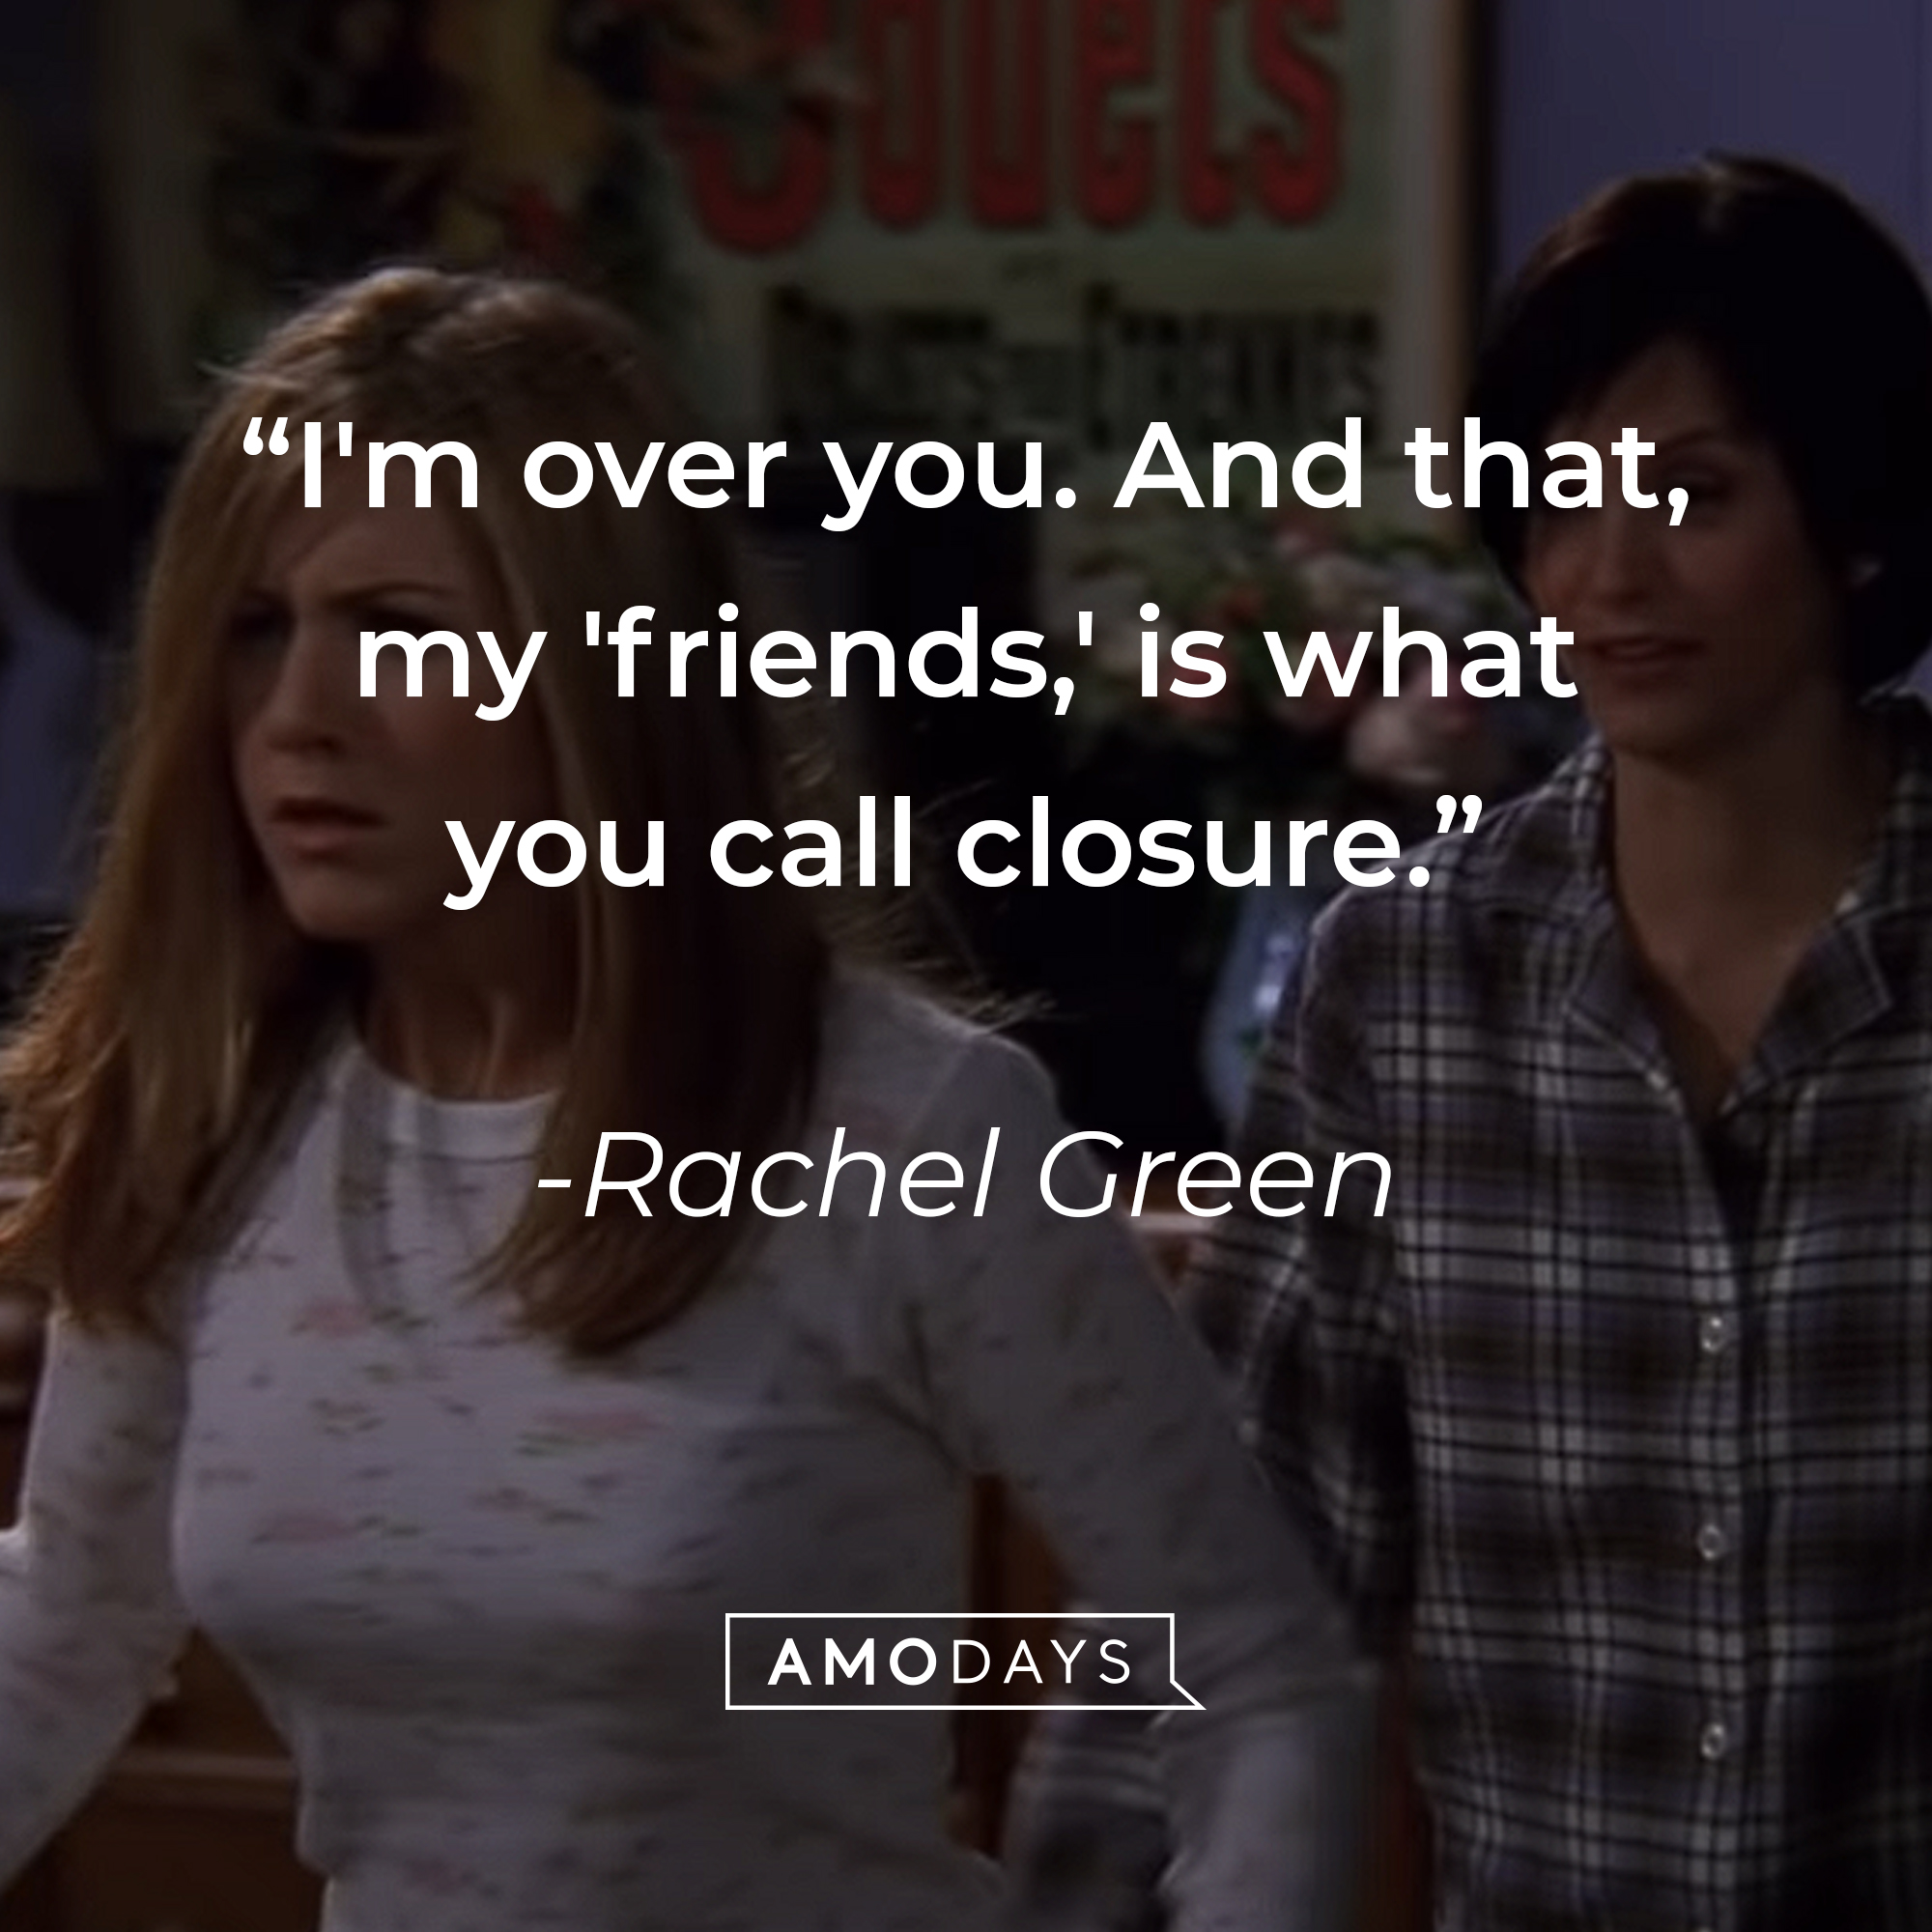 Rachel Green's quote: "I'm over you. And that, my 'friends,' is what you call closure." | Source: youtube.com/warnerbrostv